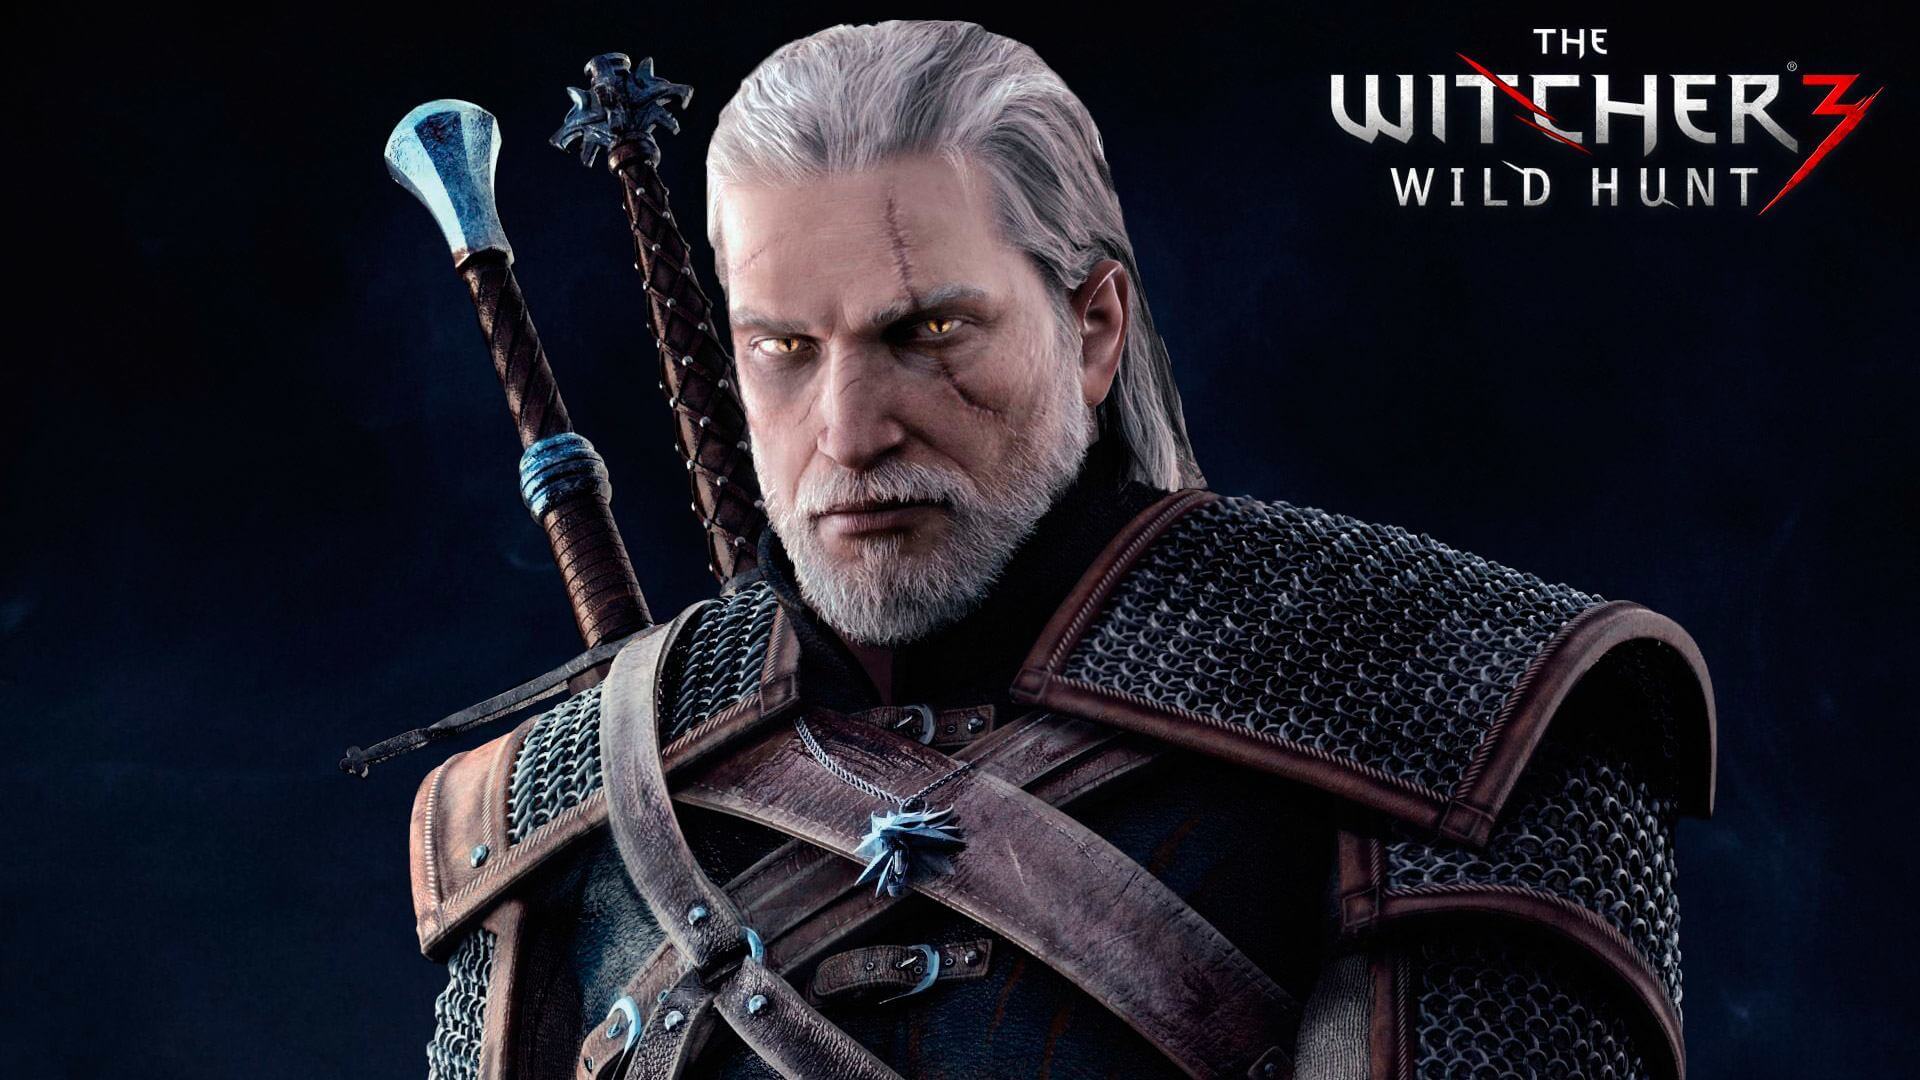 The-Witcher-3-Wild-Hunt-Main-Character-Geralt-of-Rivia-HD-Wallpaper